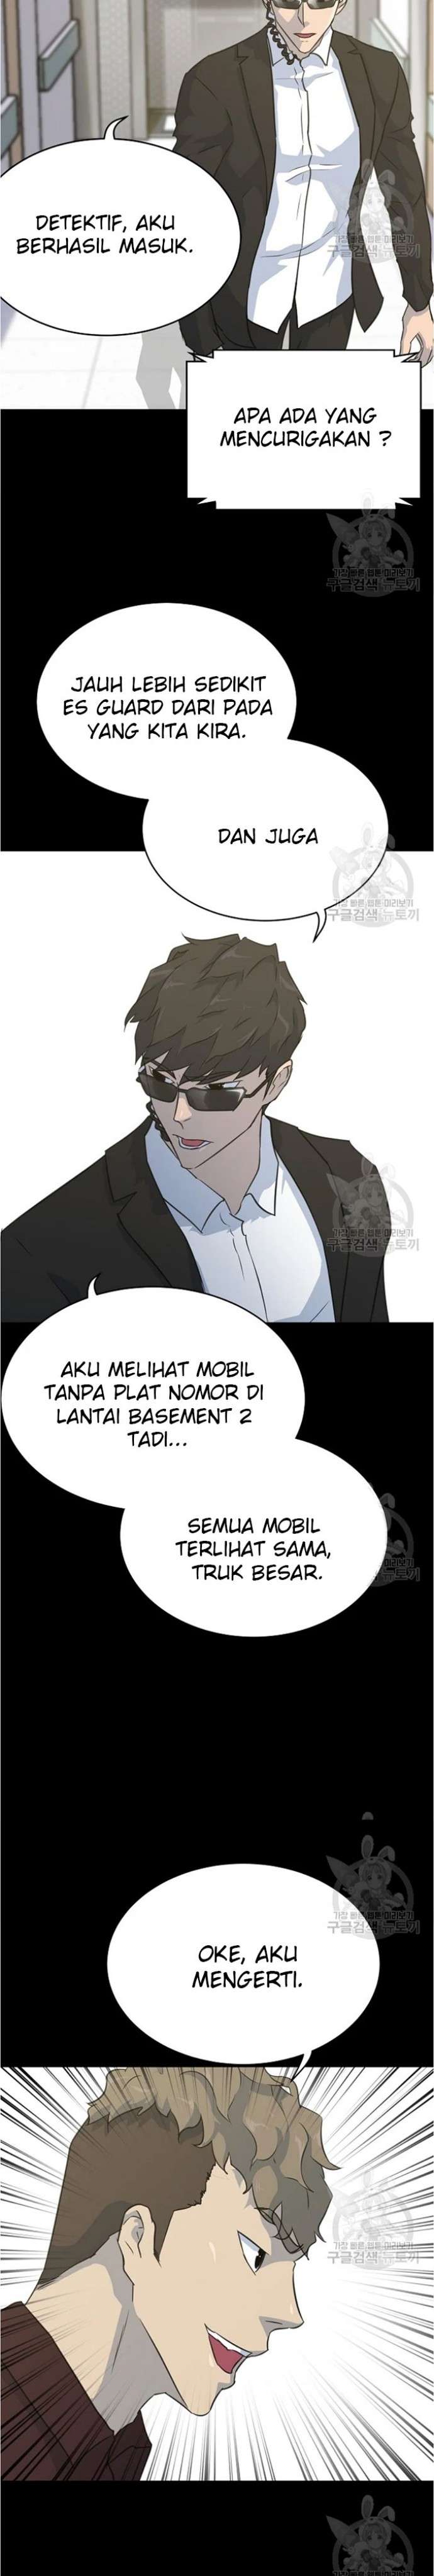 Trigger Chapter 79